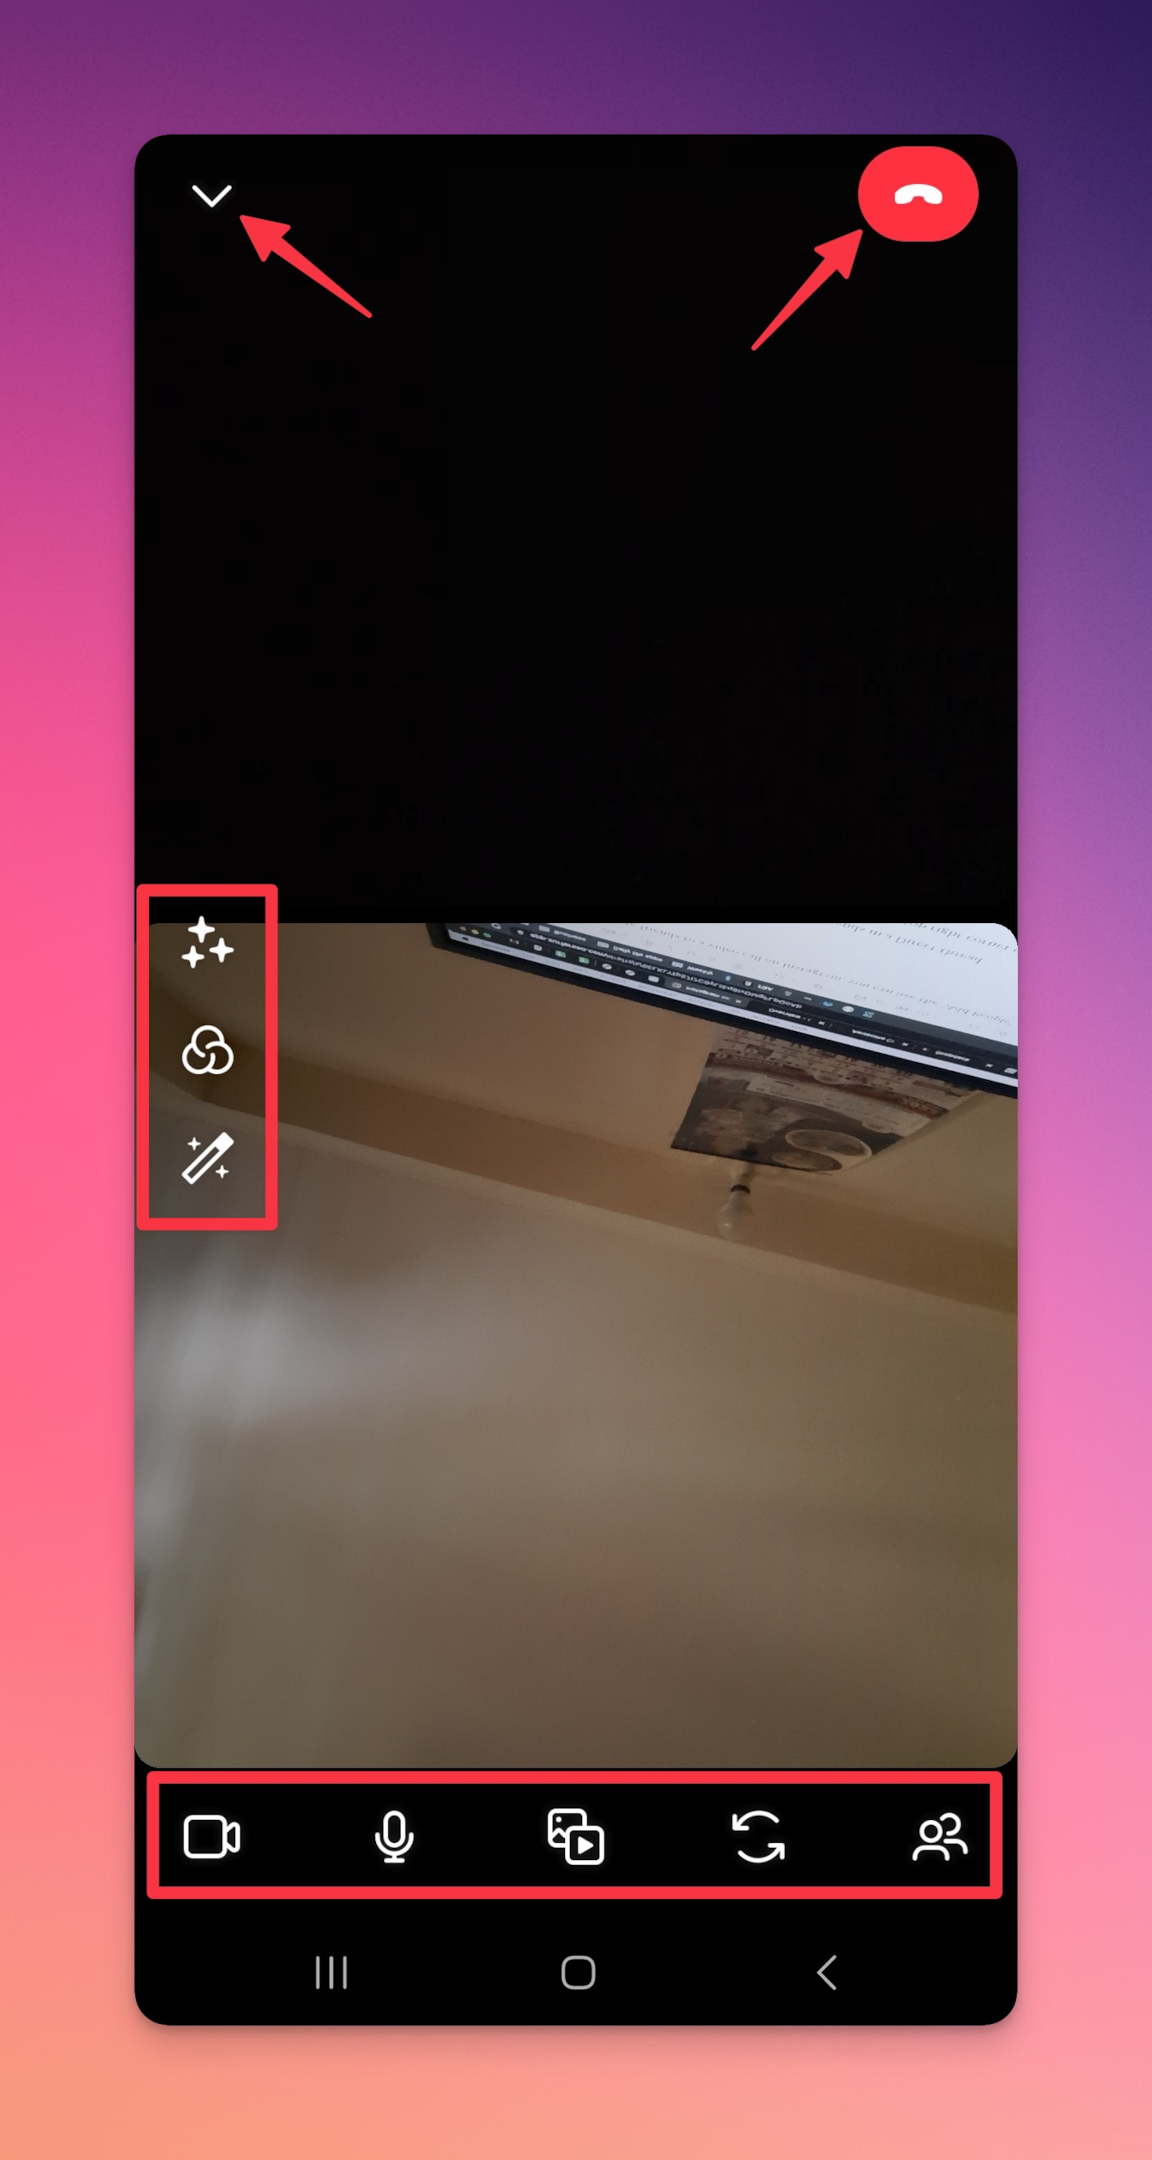 Remote.tools shows how to mute a call on Instagram and turn off the camera during a video chat